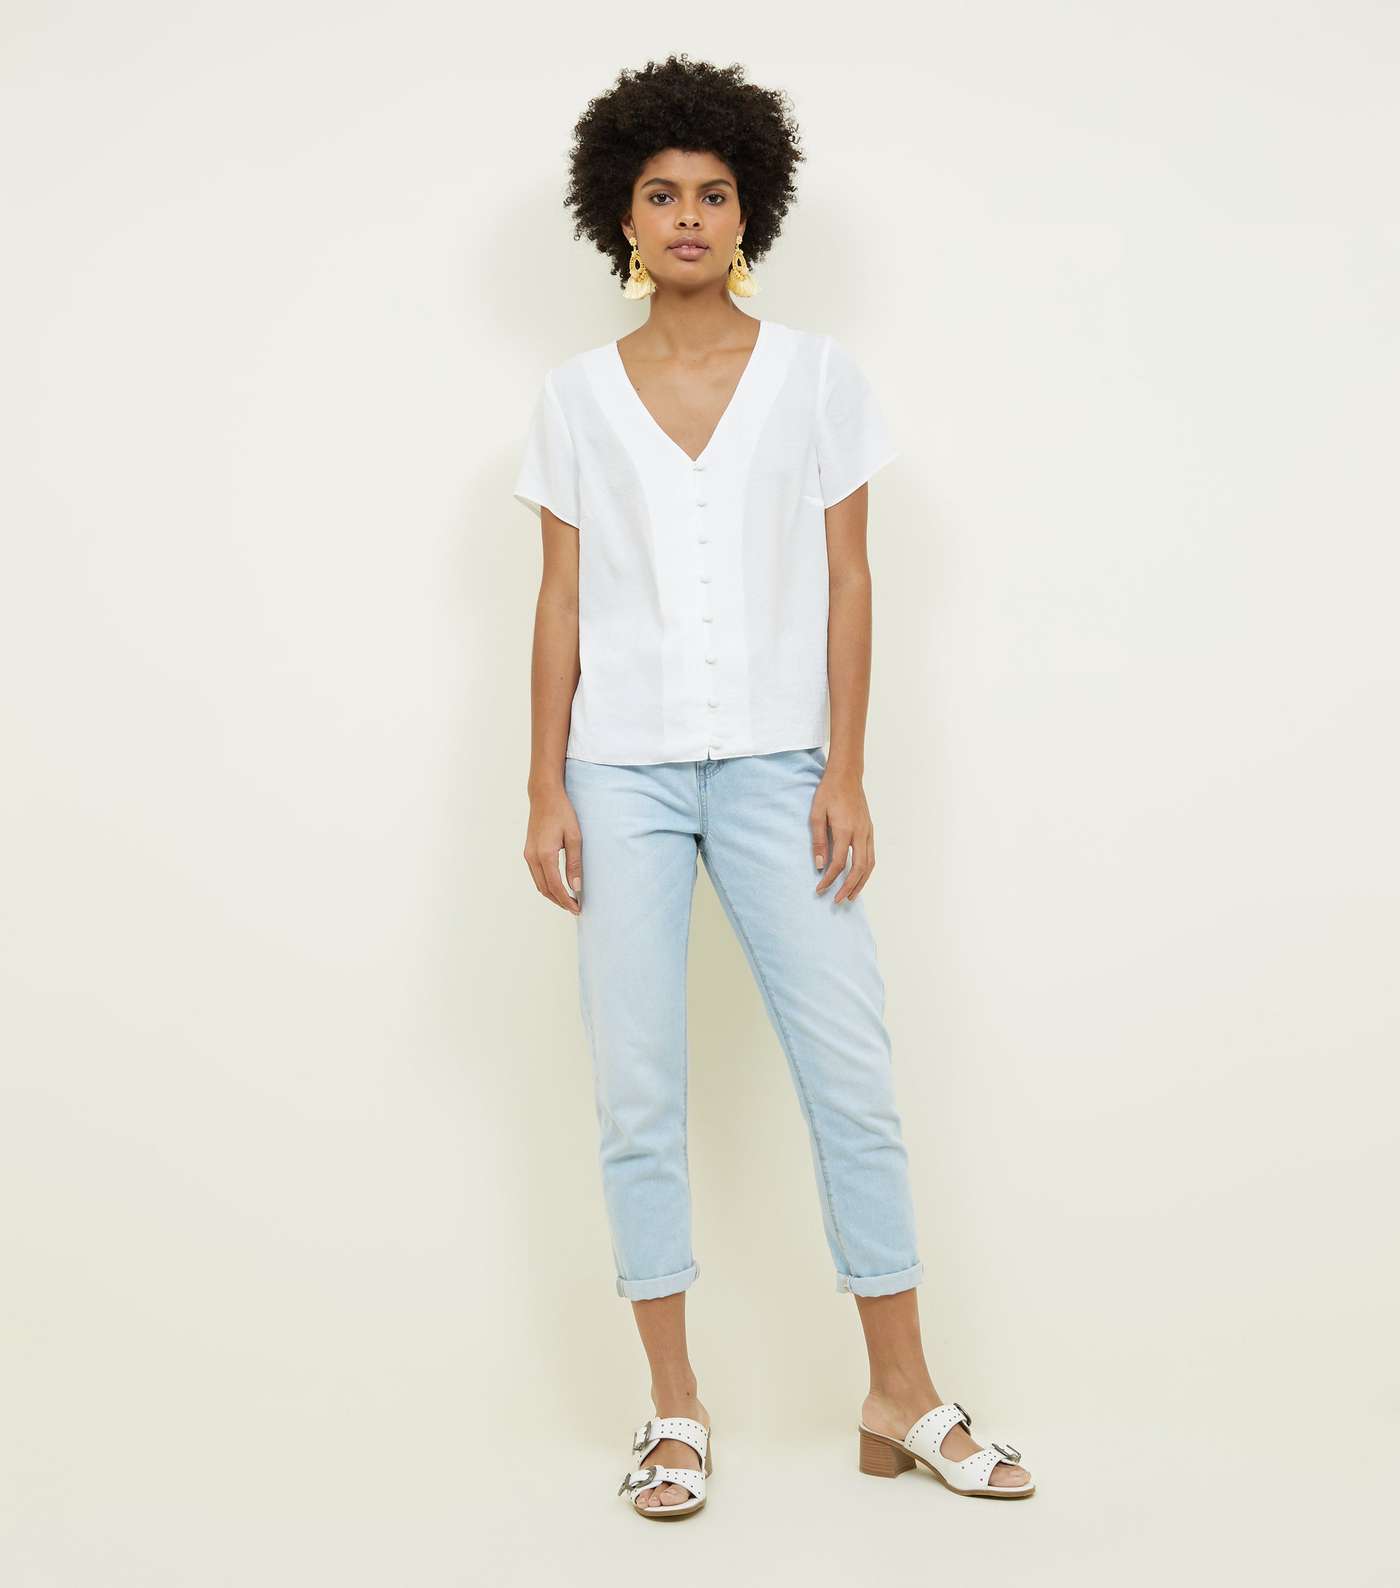 Off White V-Neck Button Front Blouse Image 2